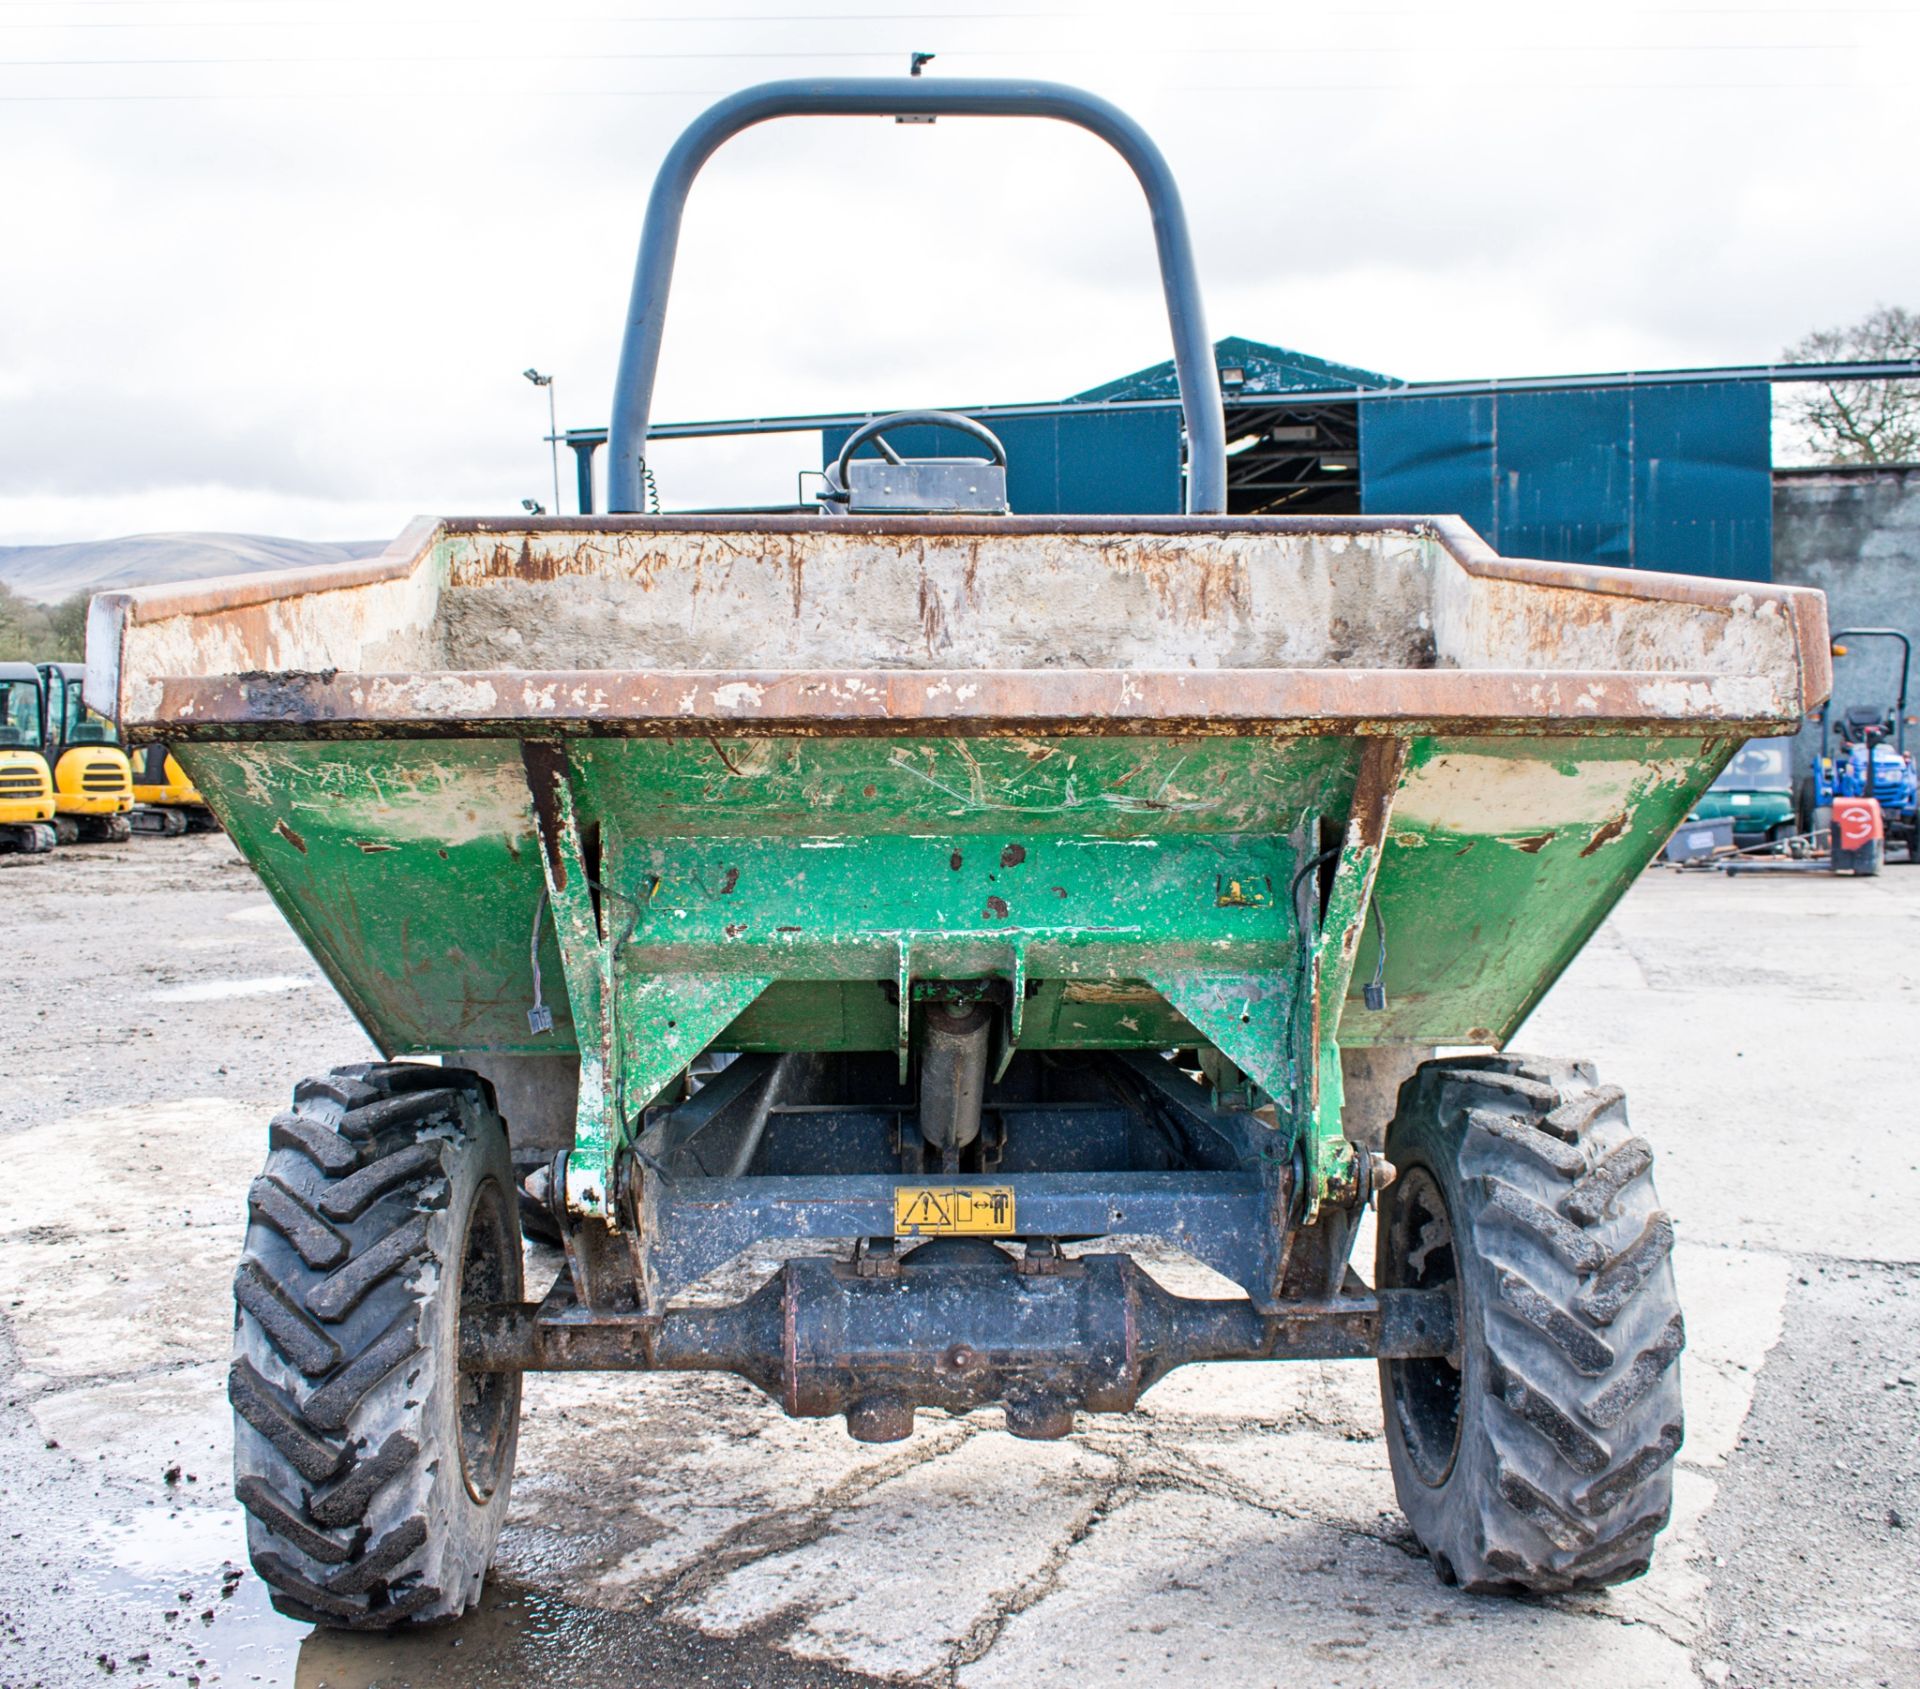 Benford Terex 2 tonne straight skip dumper Year: 2007 S/N: E703FN014 Recorded Hours: 1474 A444388 - Image 5 of 14